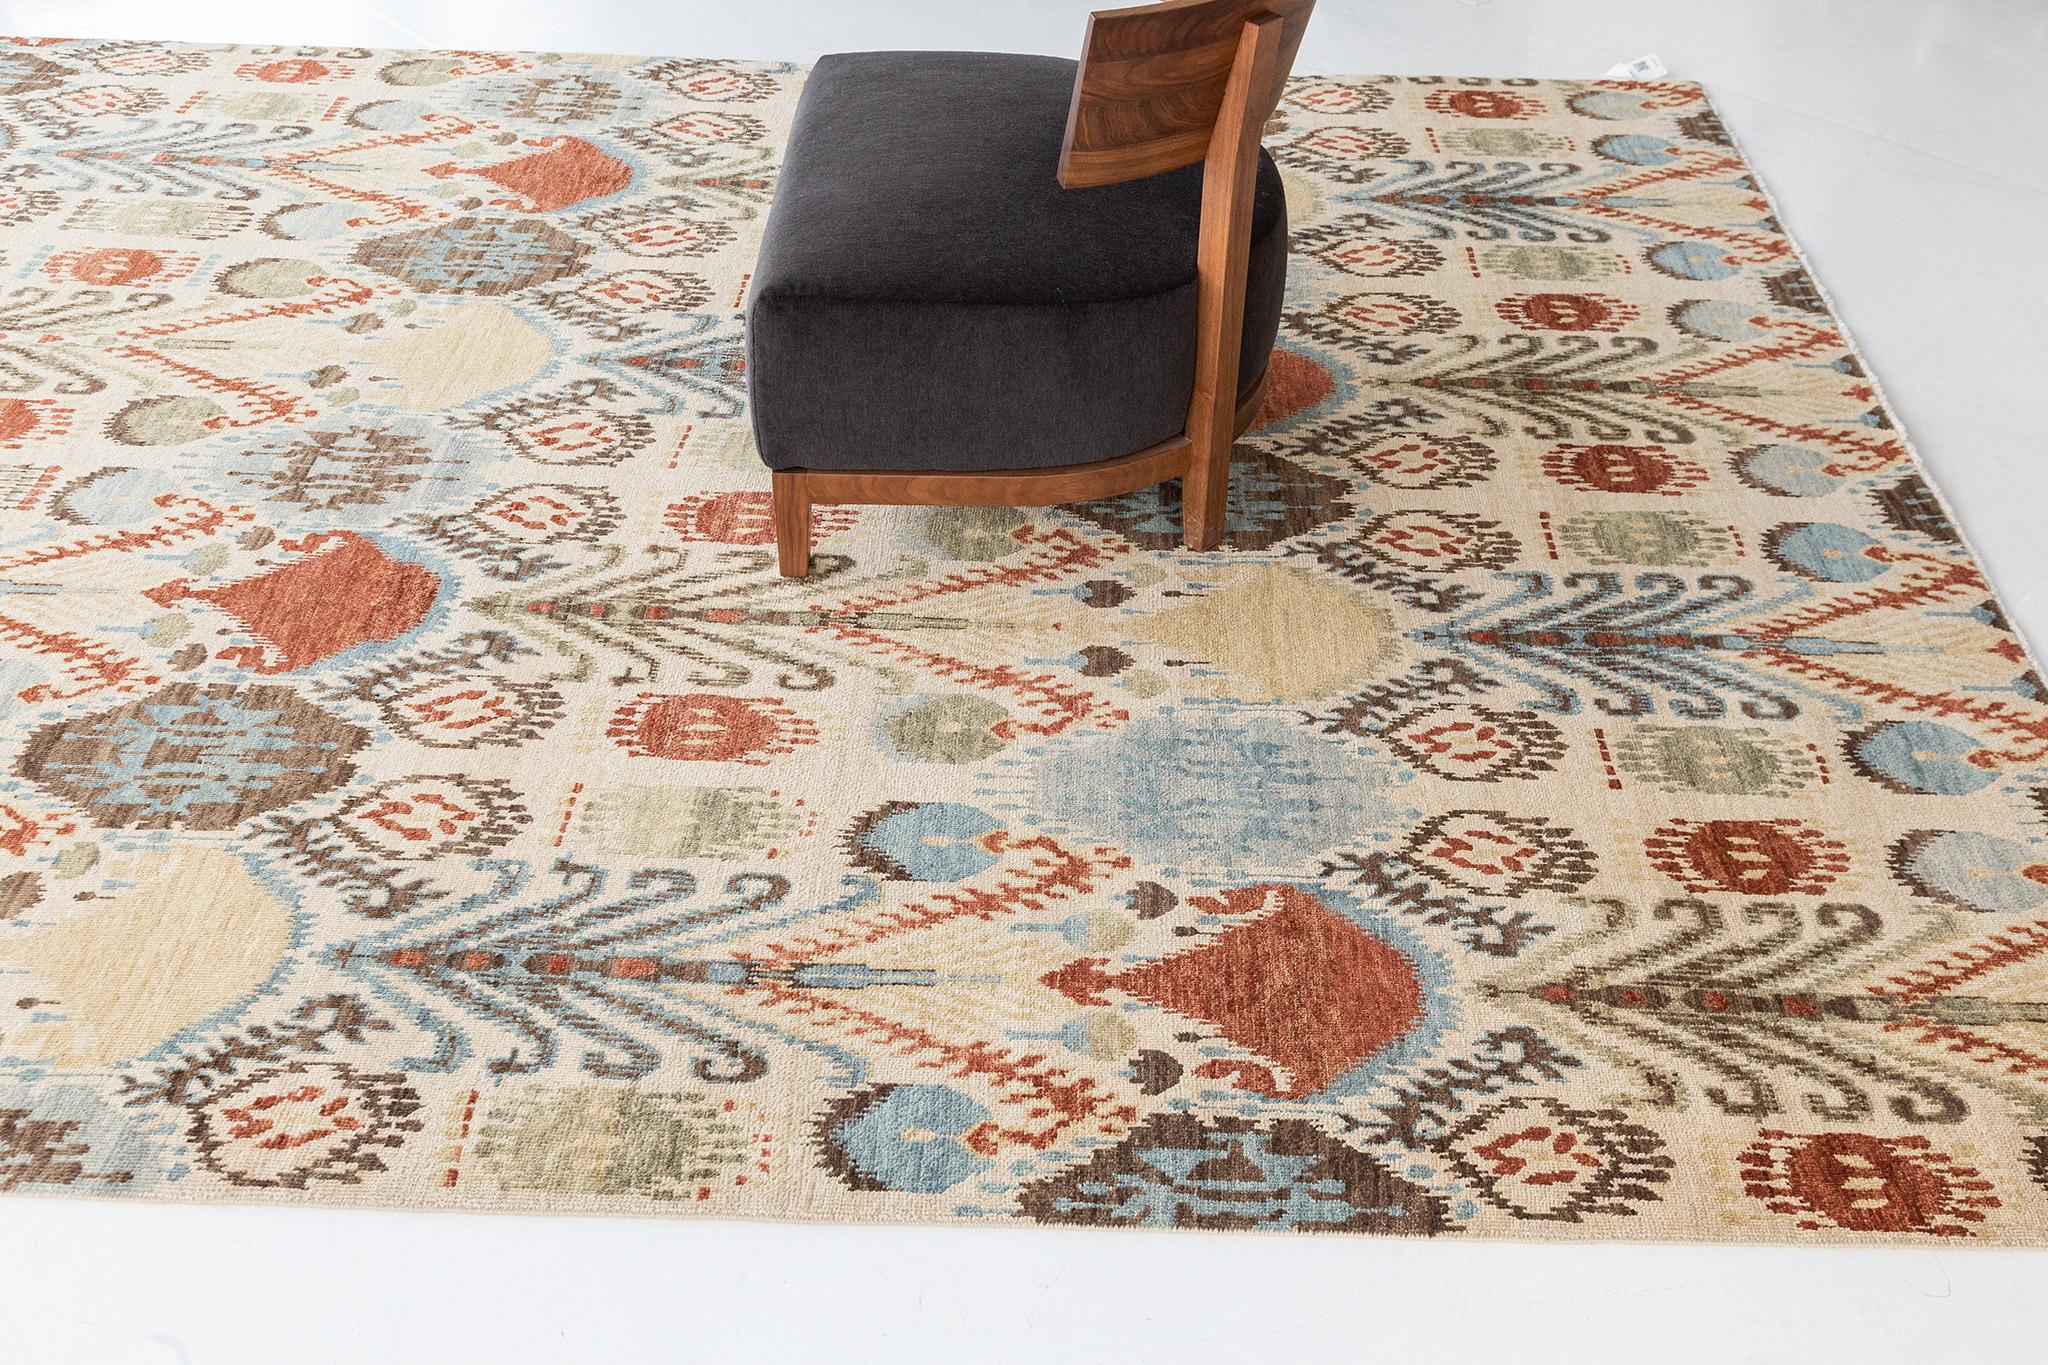 Balancing a cheerful and beguiling style, this transitional Ikat rug in Ferghana beautifully displays a modern vibe. The abrashed field is covered in a repetitive Ikat pattern running along the cream field. A perfect way to give your room a fresh,